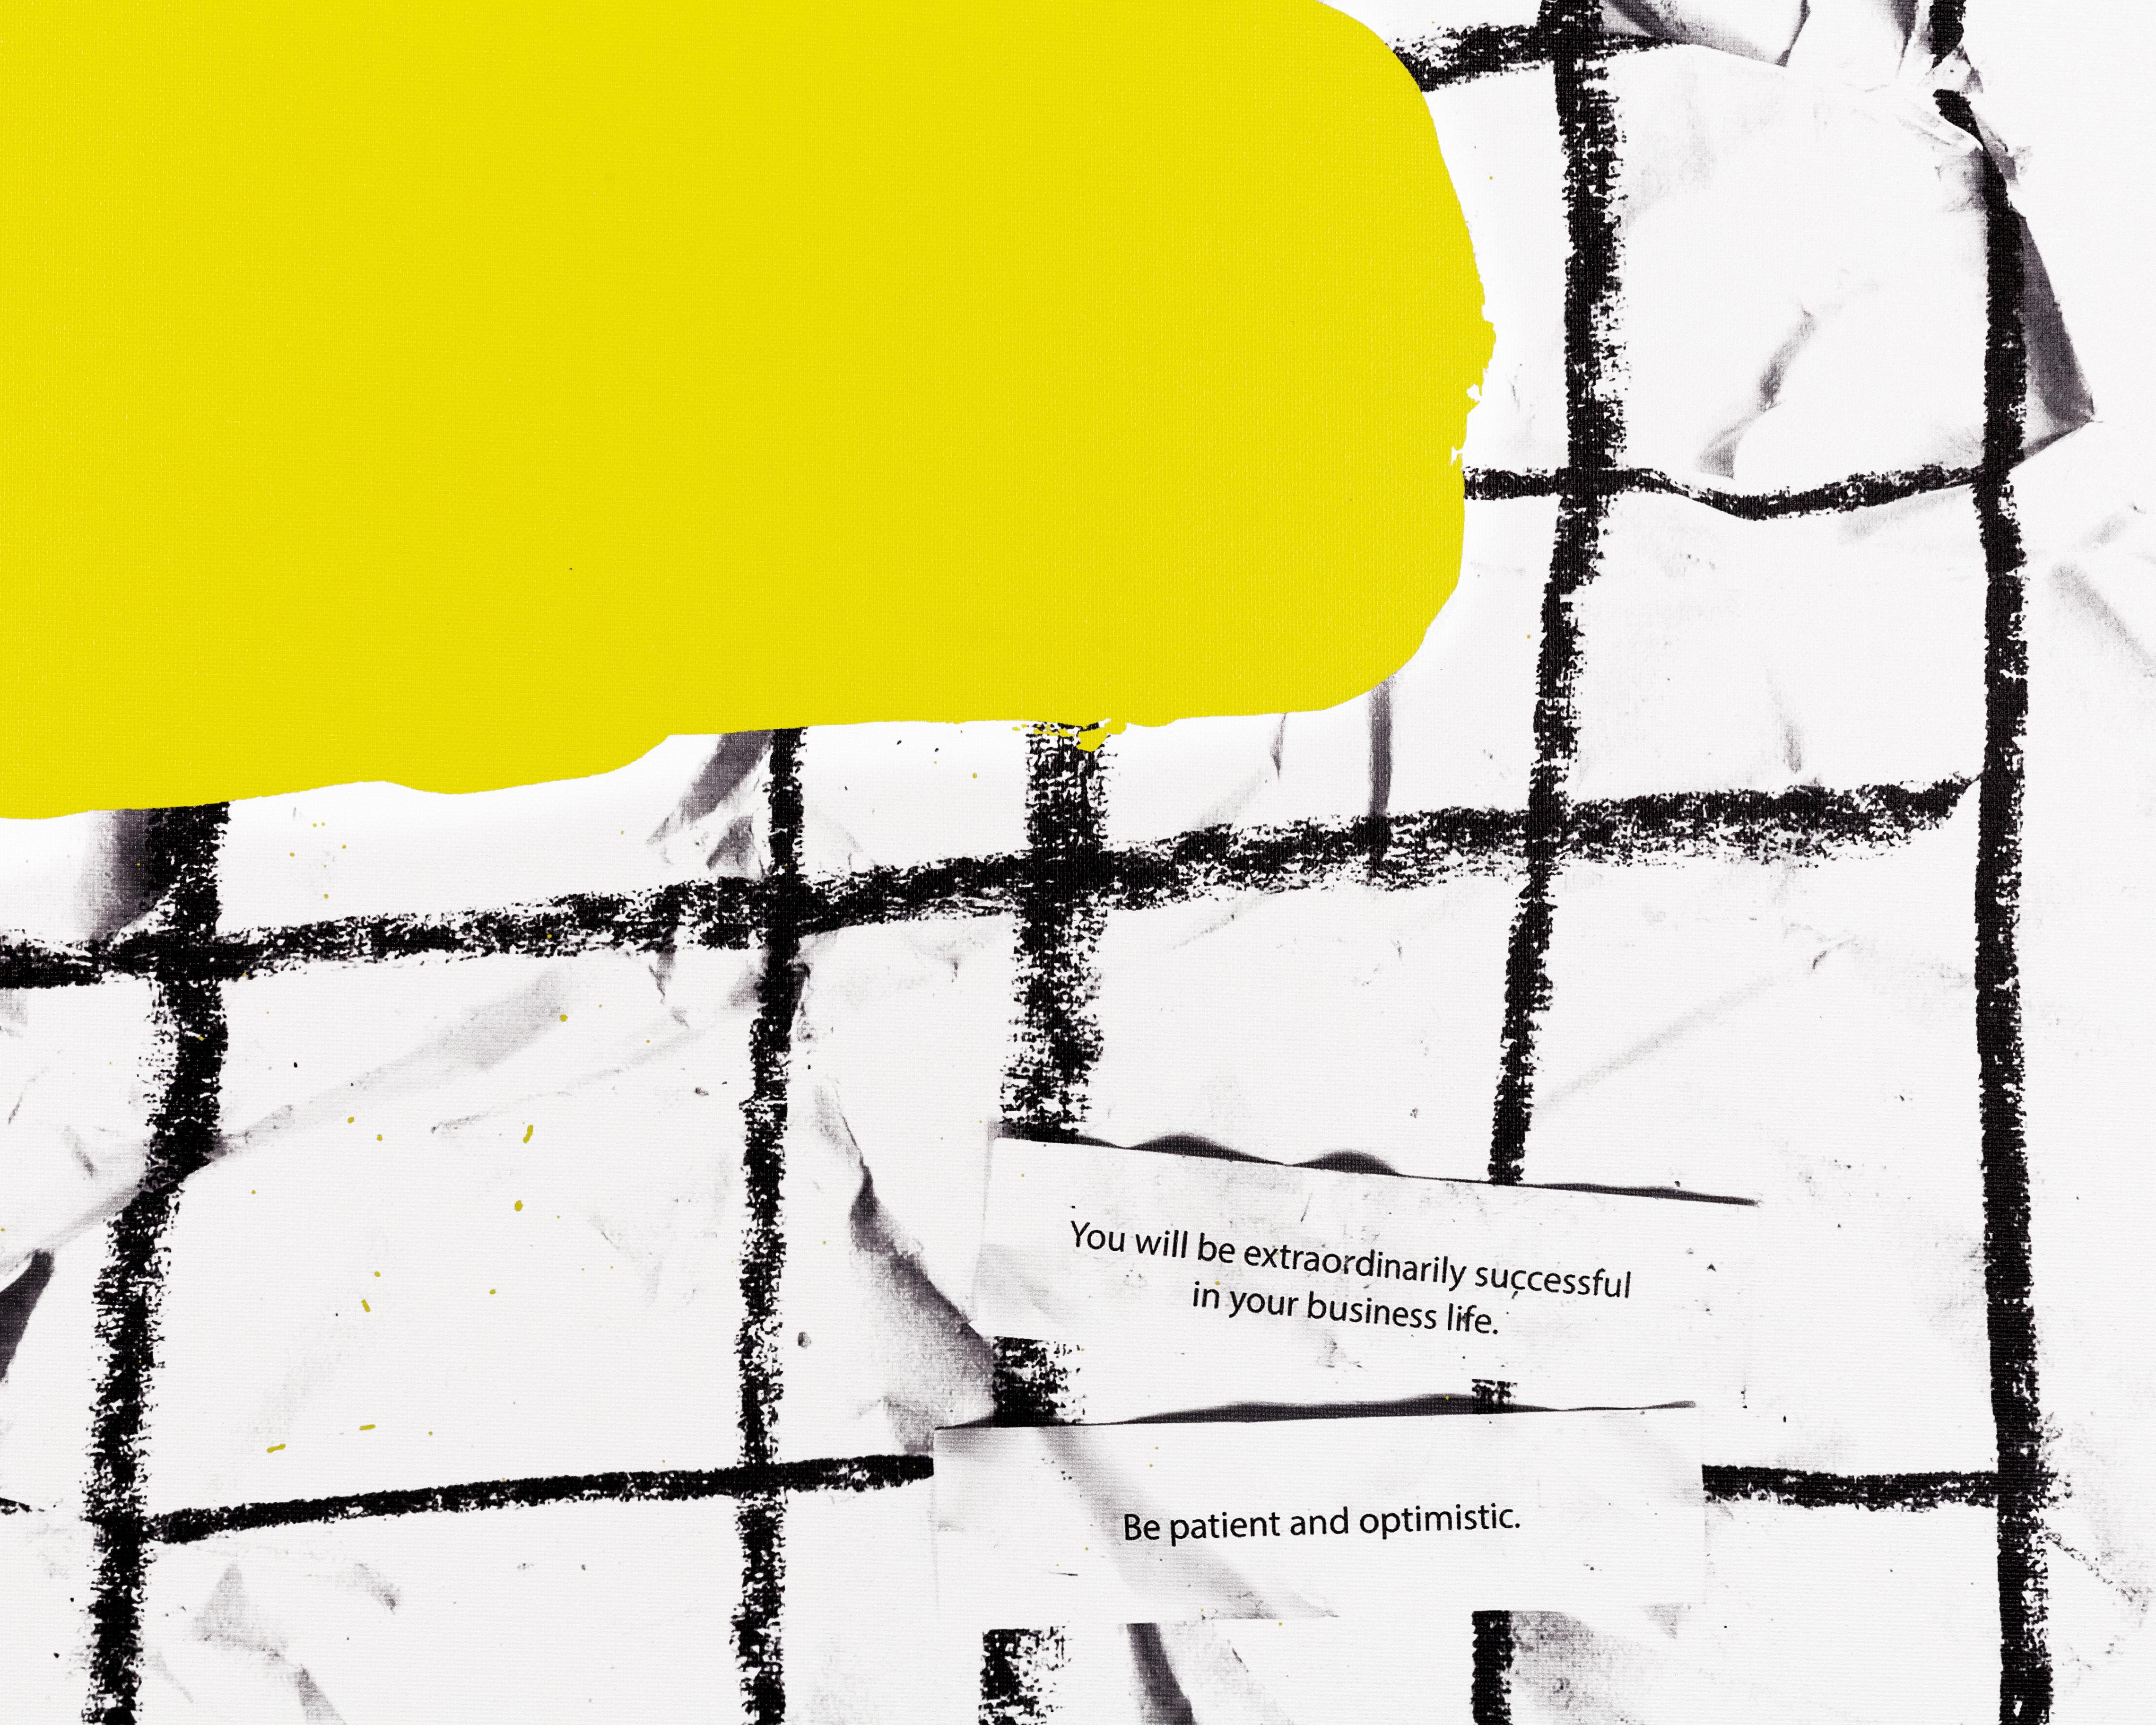 Messages of destiny (Yellow version) (Abstract print)
Print on canvas
This artwork is exclusive to IdeelArt.

Aleksandar Topić's artworks are spontaneous creative manifestations, unconstrained in the use of colors, forms, and gestures. Born in 1991